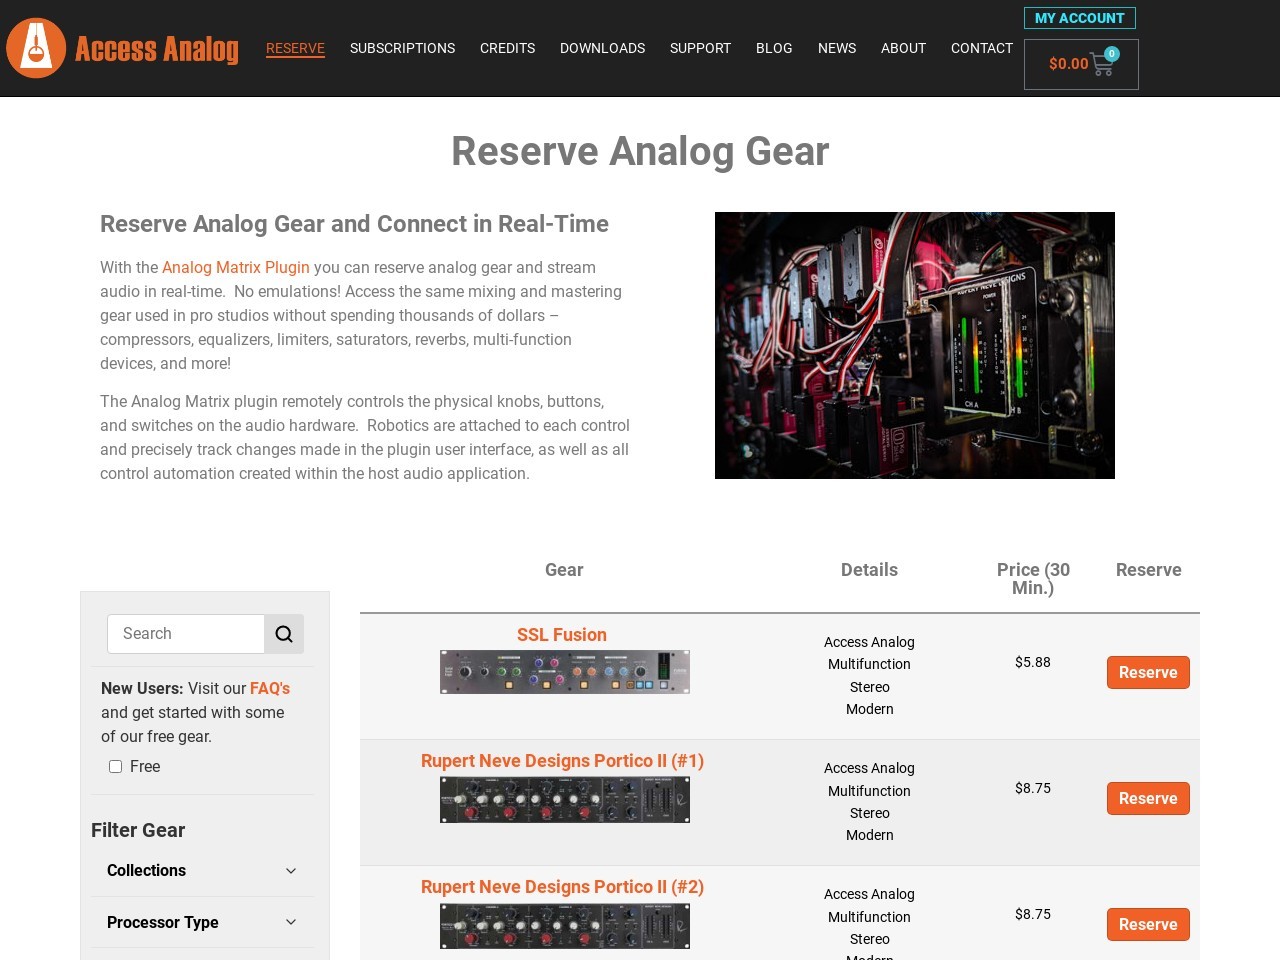 Reserve Analog Gear and Connect in Real-Time | Access Analog